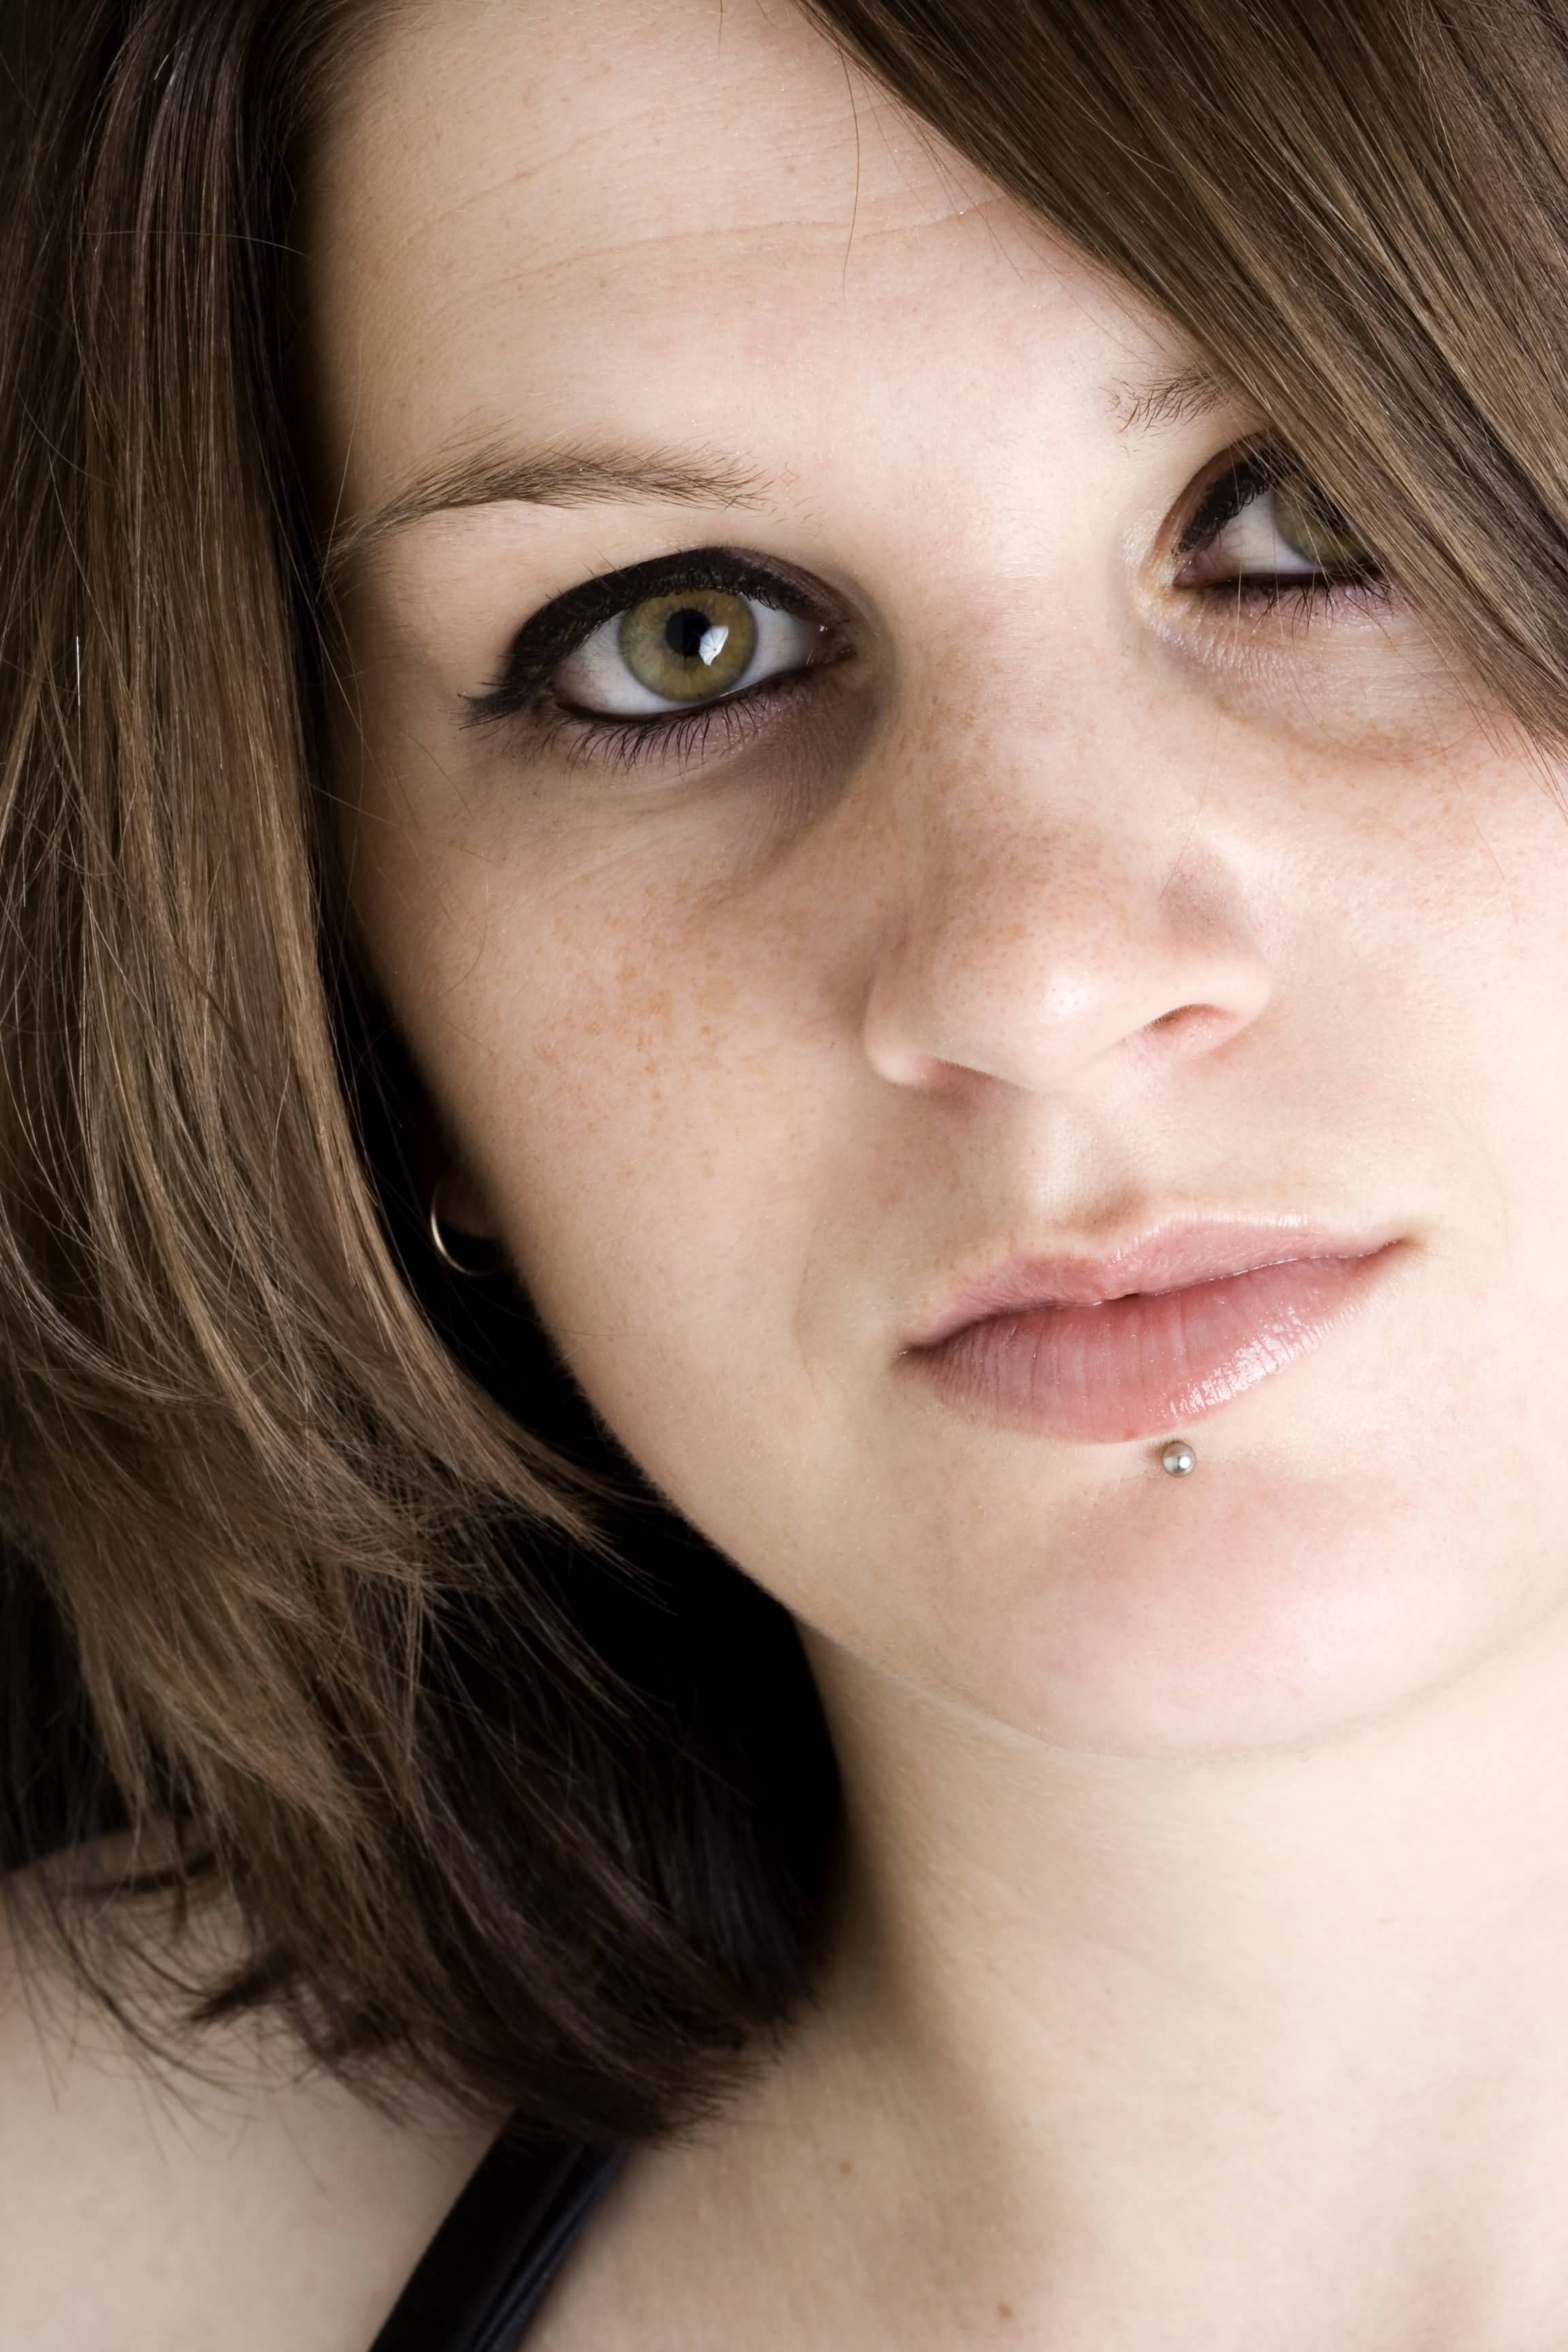 Beautiful Girl With Labret Piercing